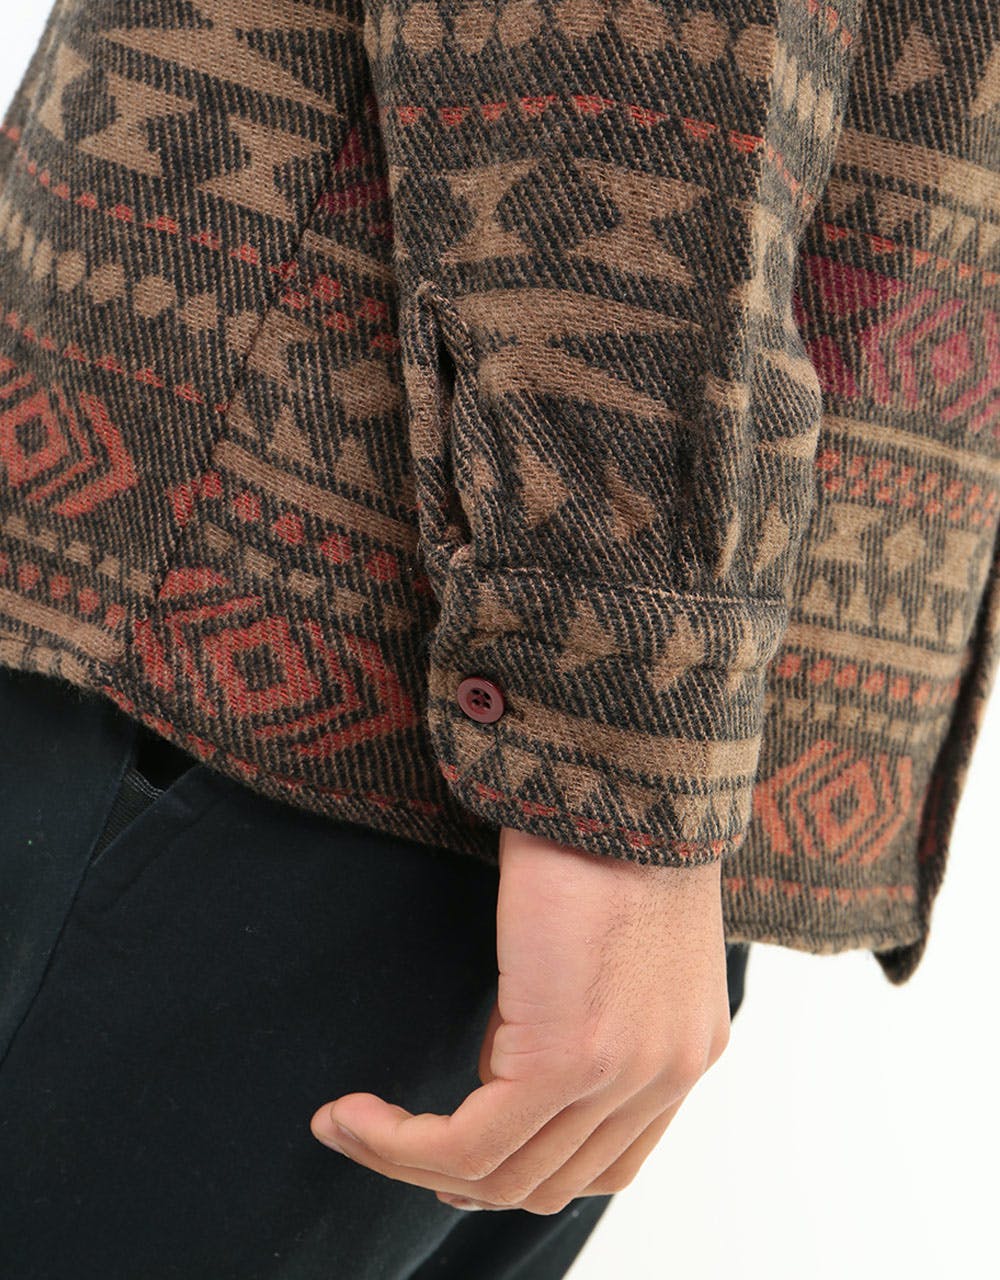 Route One Navajo Heavyweight Flannel Shirt - Brown/Multi